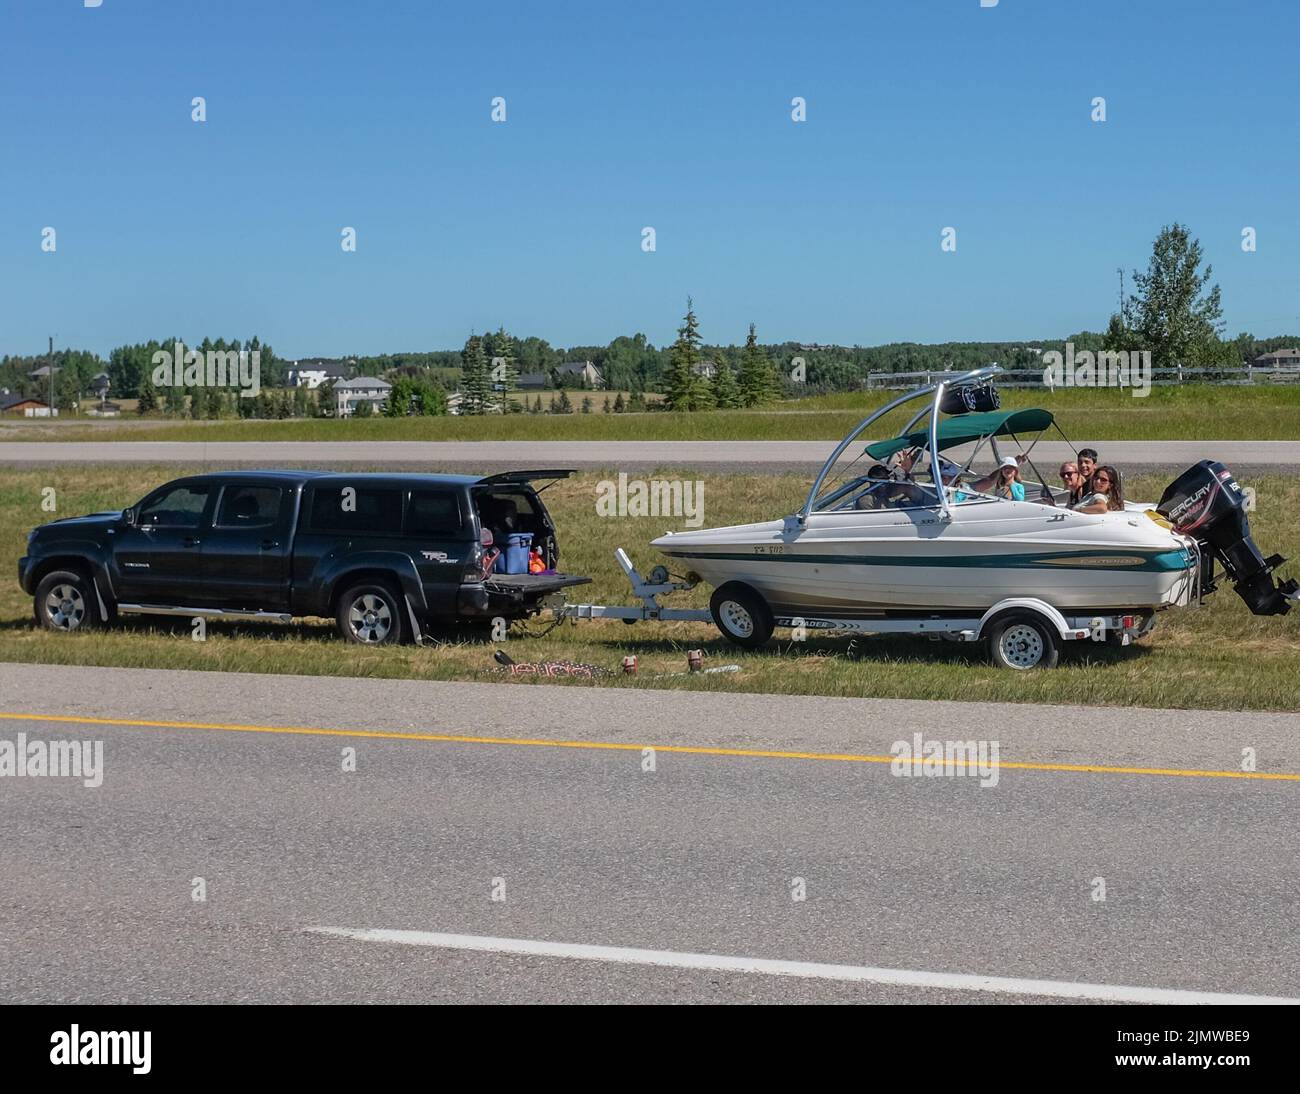 People with vehicle issues still managing to have some fun in the boat. Stock Photo